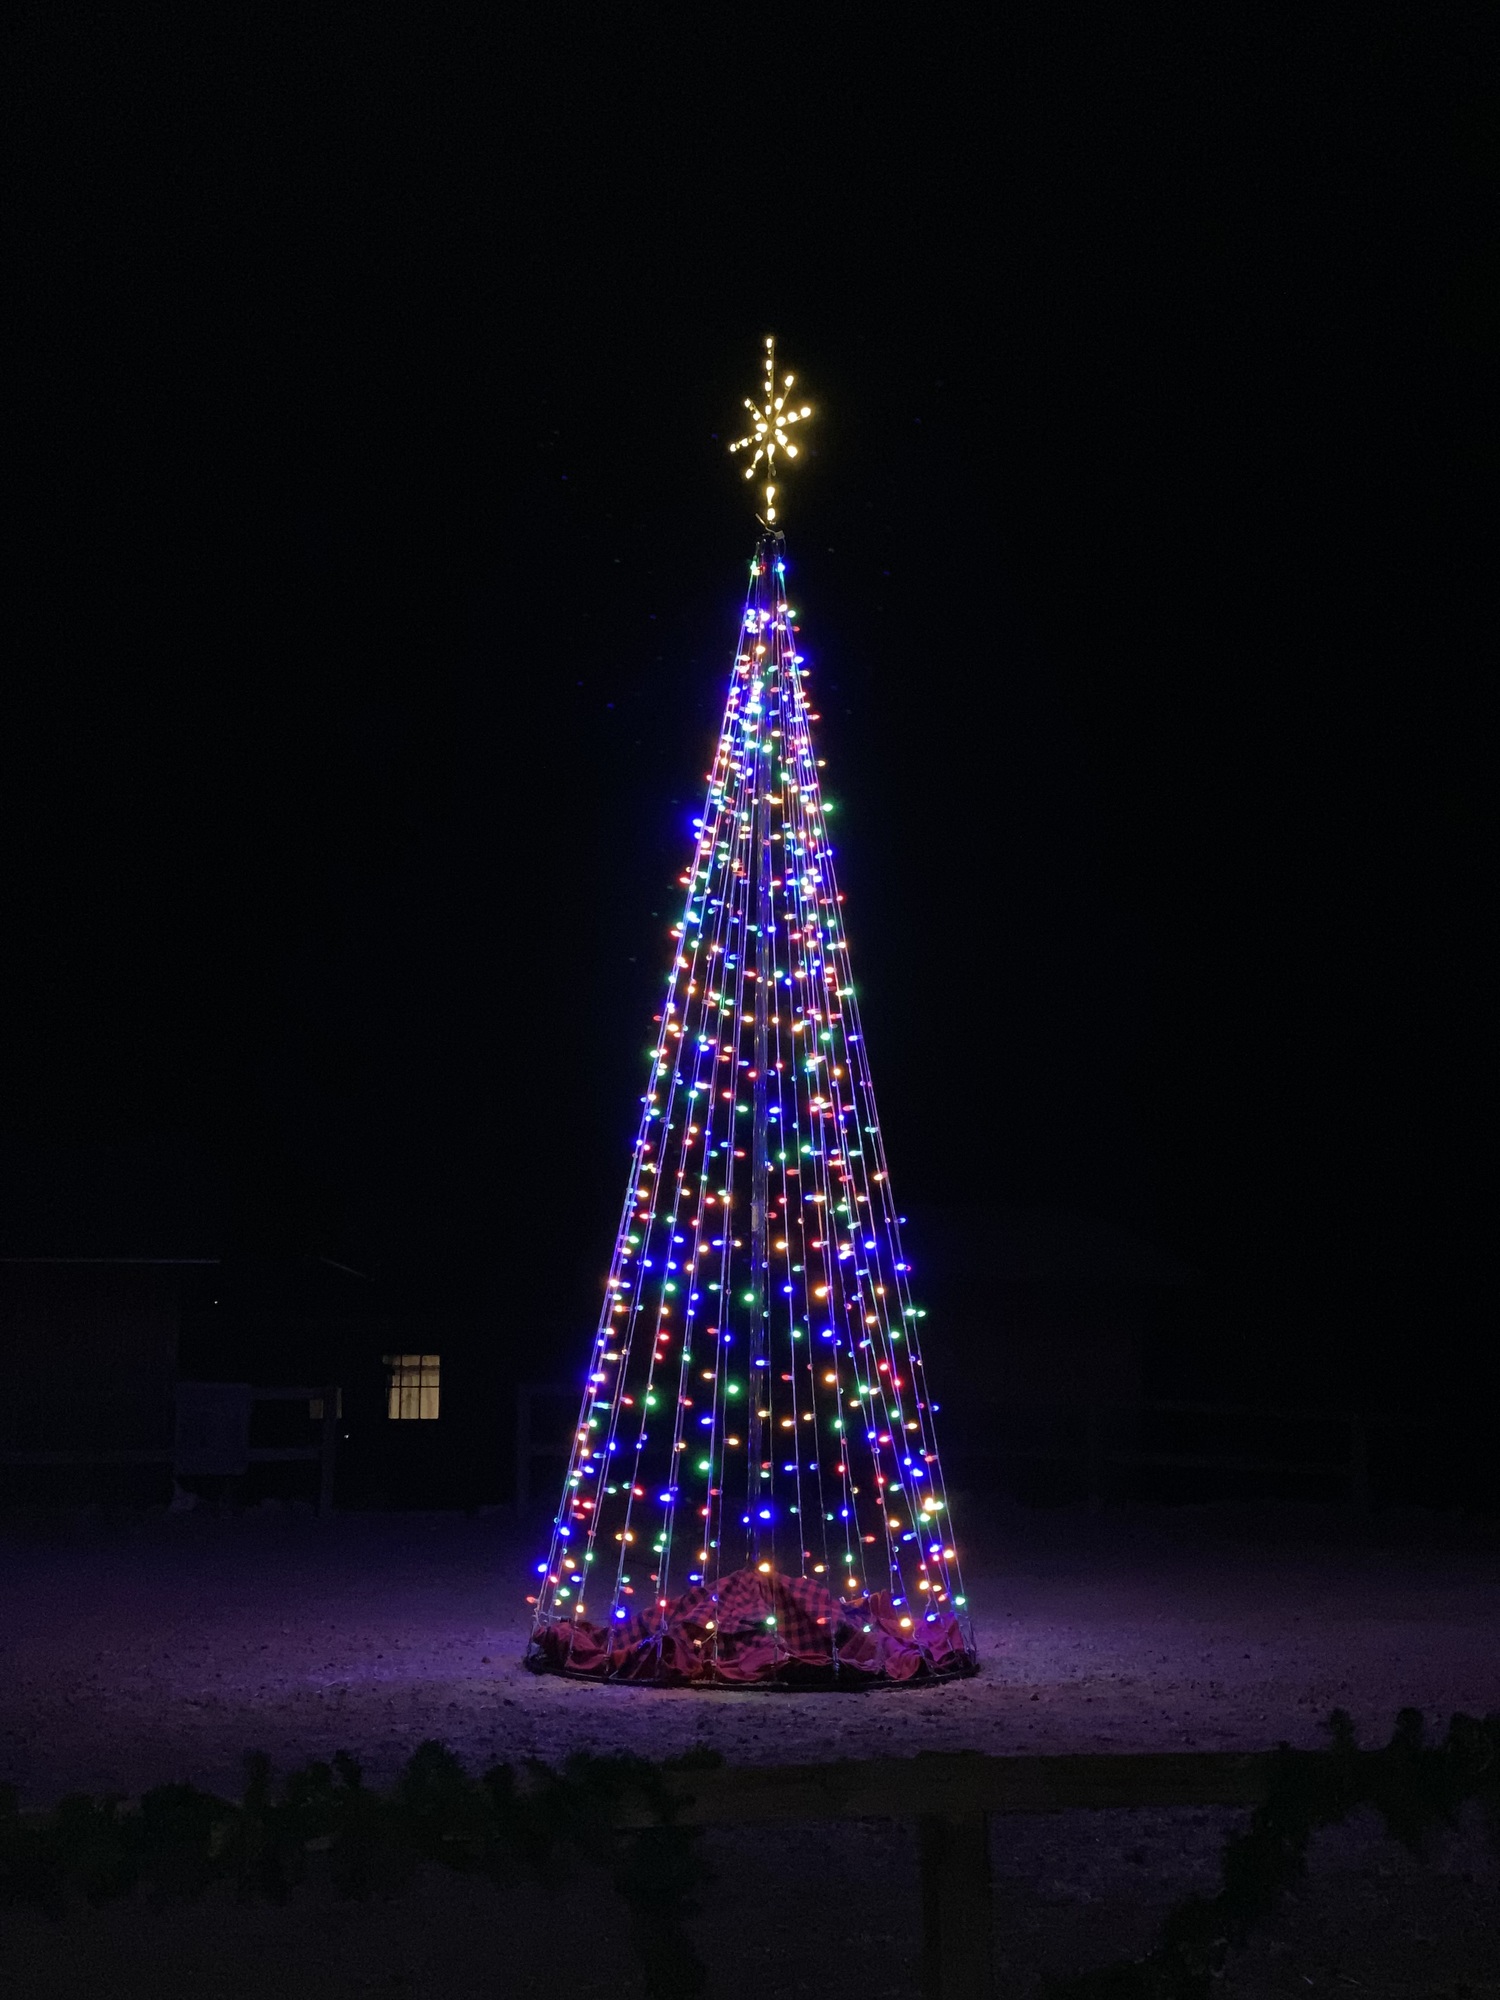 A night time photo of a Christmas tree all lit up at Calico Ghost Town.